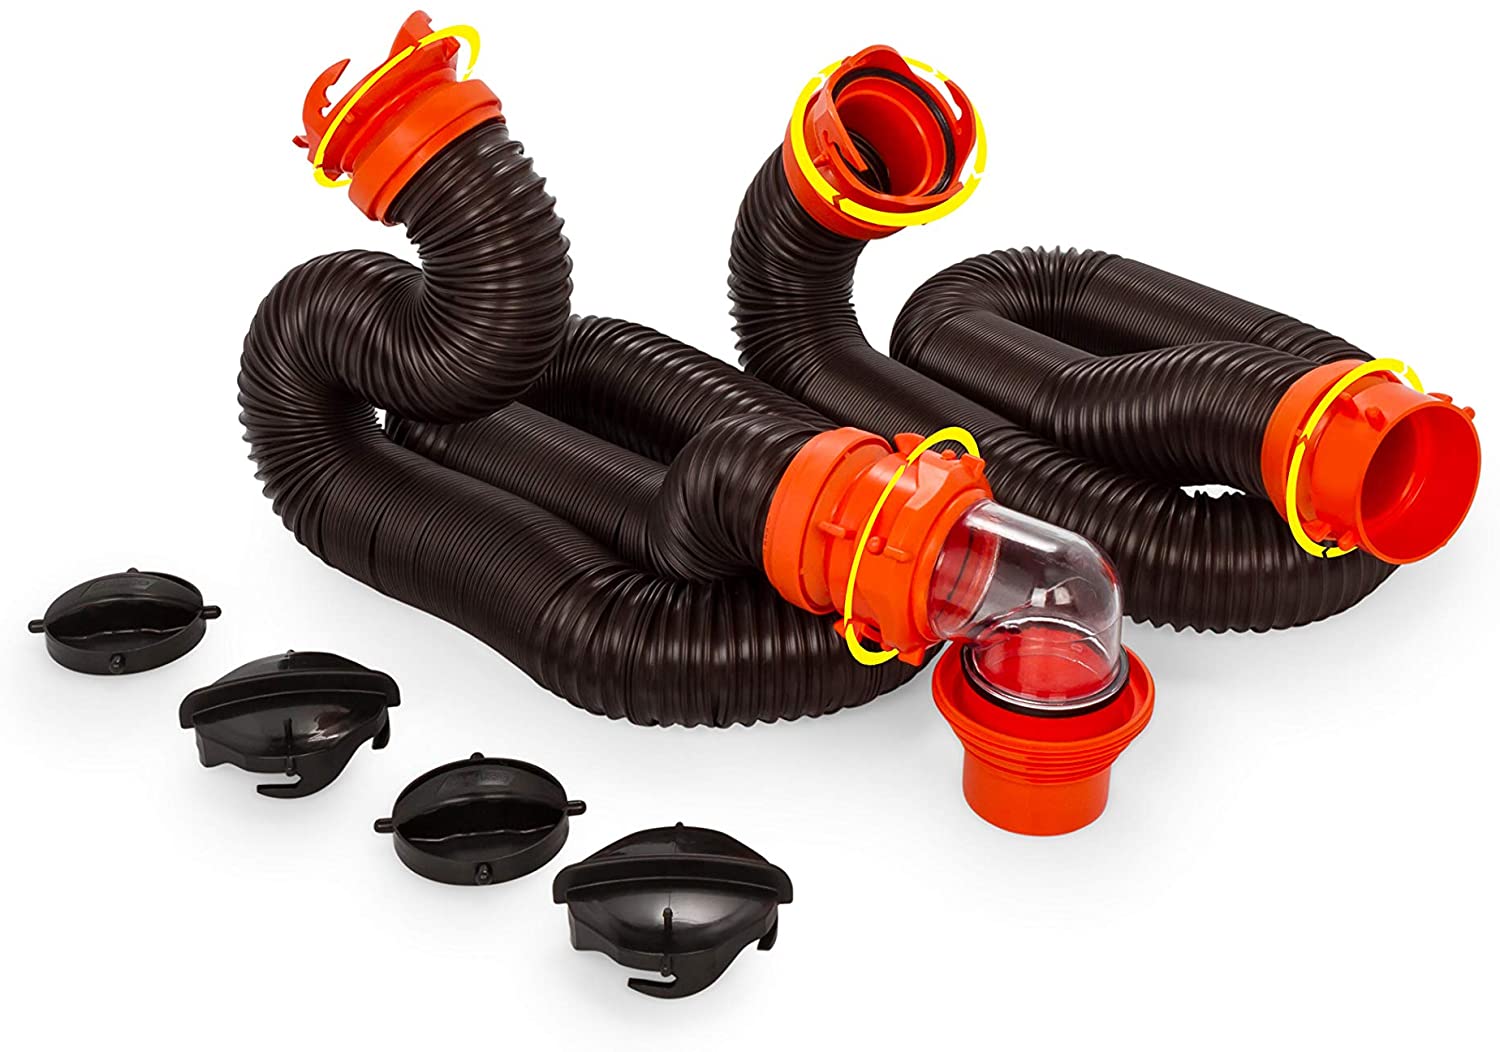 Camco 20' (39742) Rhino FLEX 20-Foot RV Sewer Hose Kit, Swivel Transparent Elbow with 4-in-1 Dump Station Fitting-Storage Caps Included